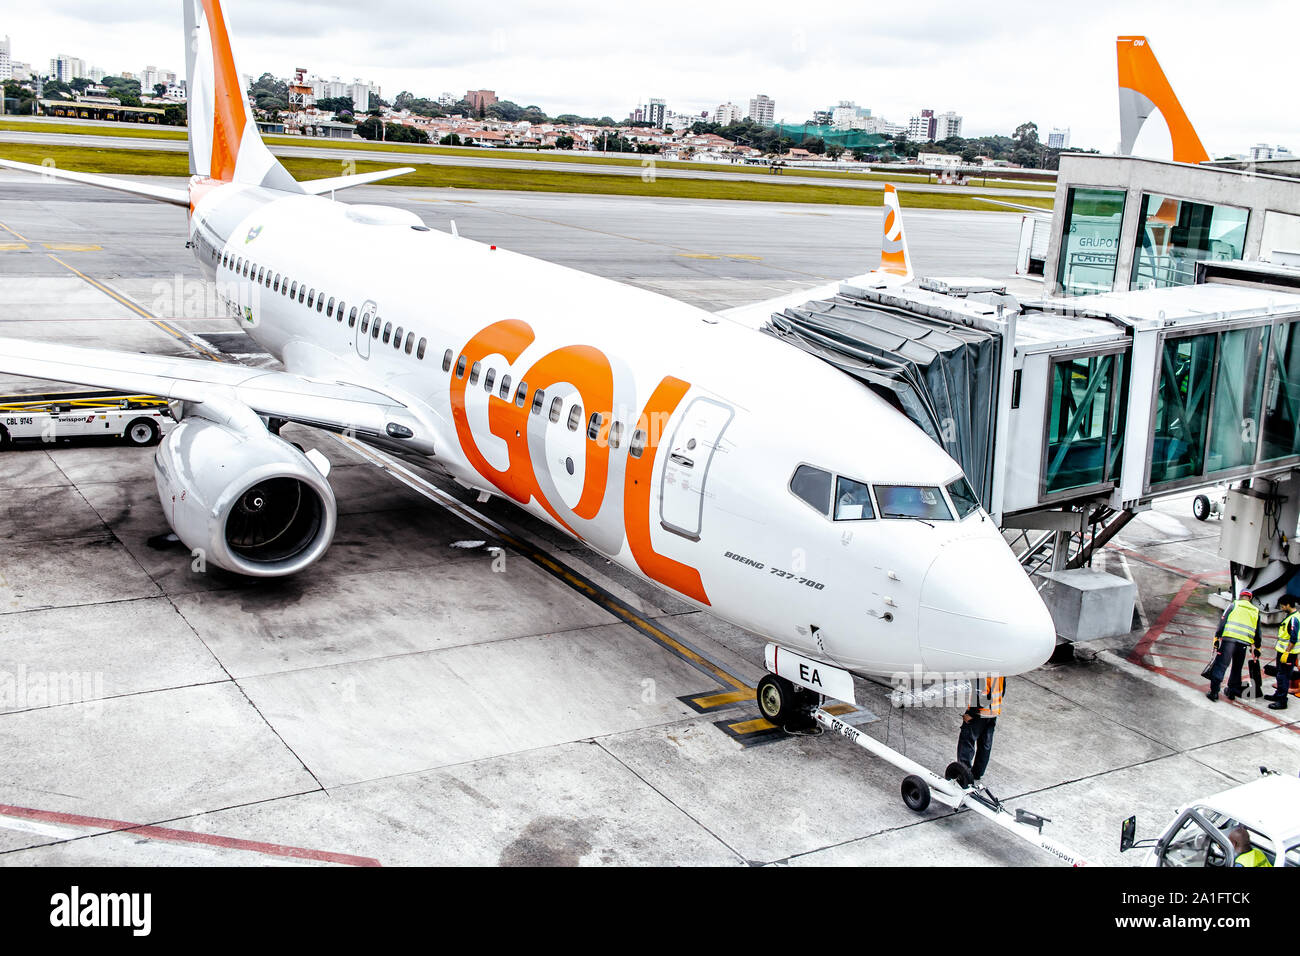 Photograph taken at the Congonhas airport the city of São Paulo-Brazil in the month of March 2019. Boeing 737-700 Aircraft from GOL company. Stock Photo